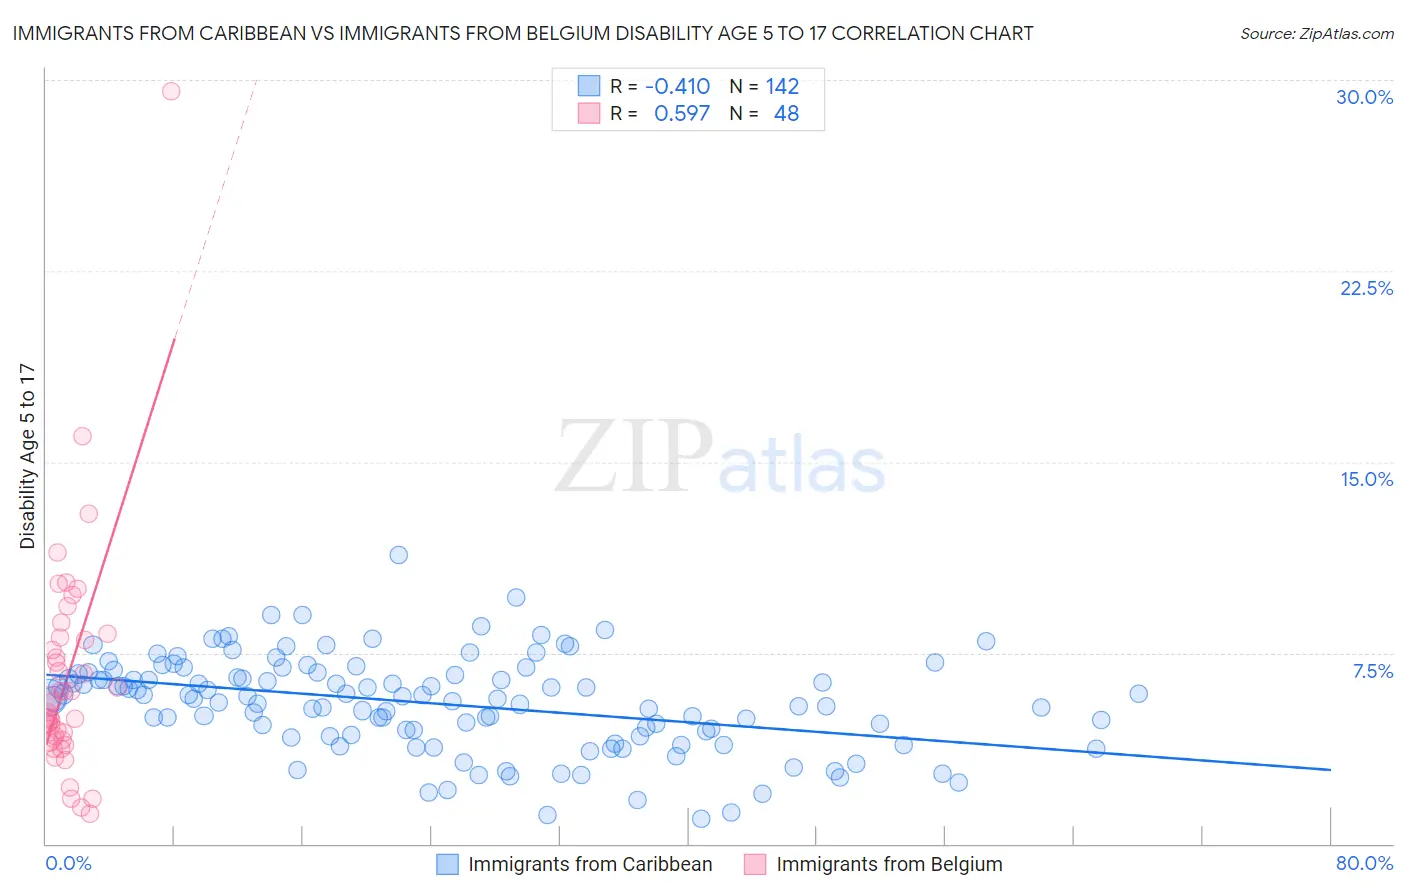 Immigrants from Caribbean vs Immigrants from Belgium Disability Age 5 to 17